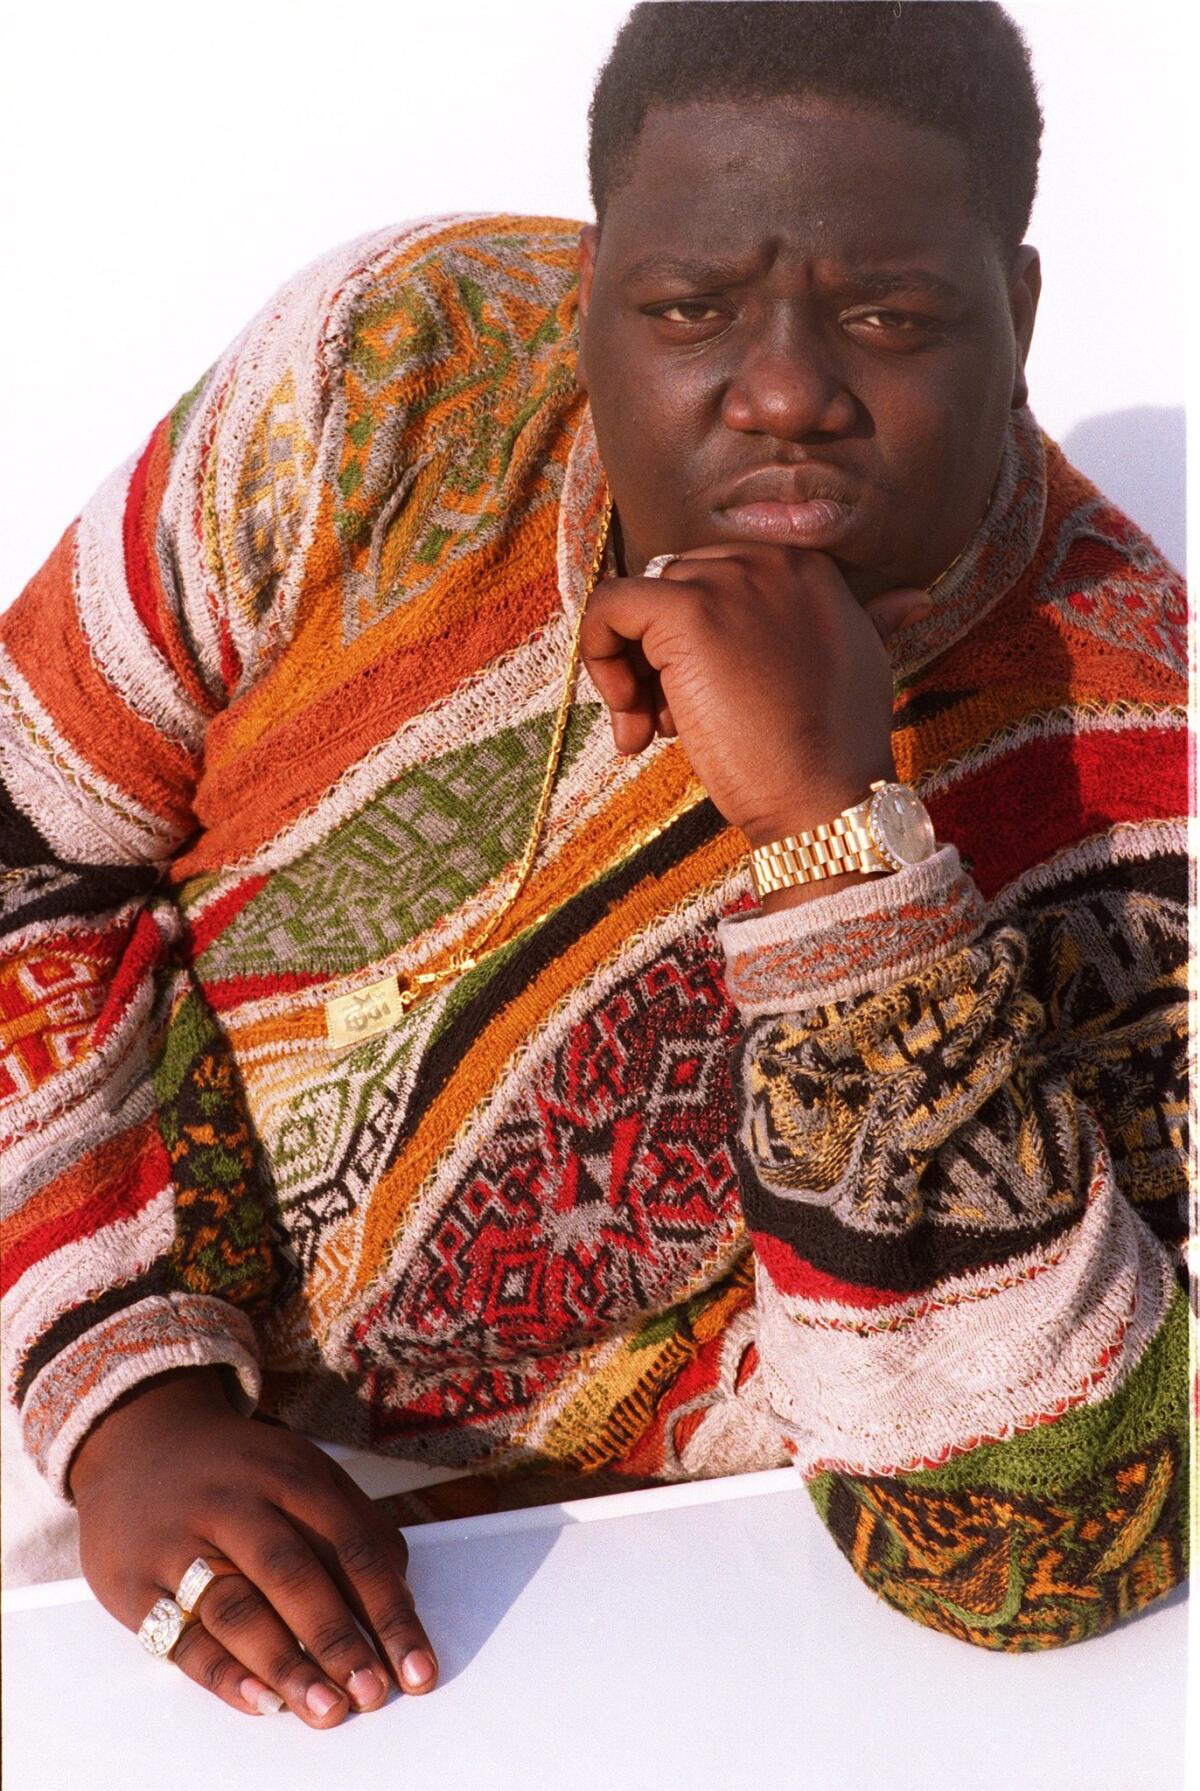 Notorious B.I.G, a rapper from Brooklyn, NY.